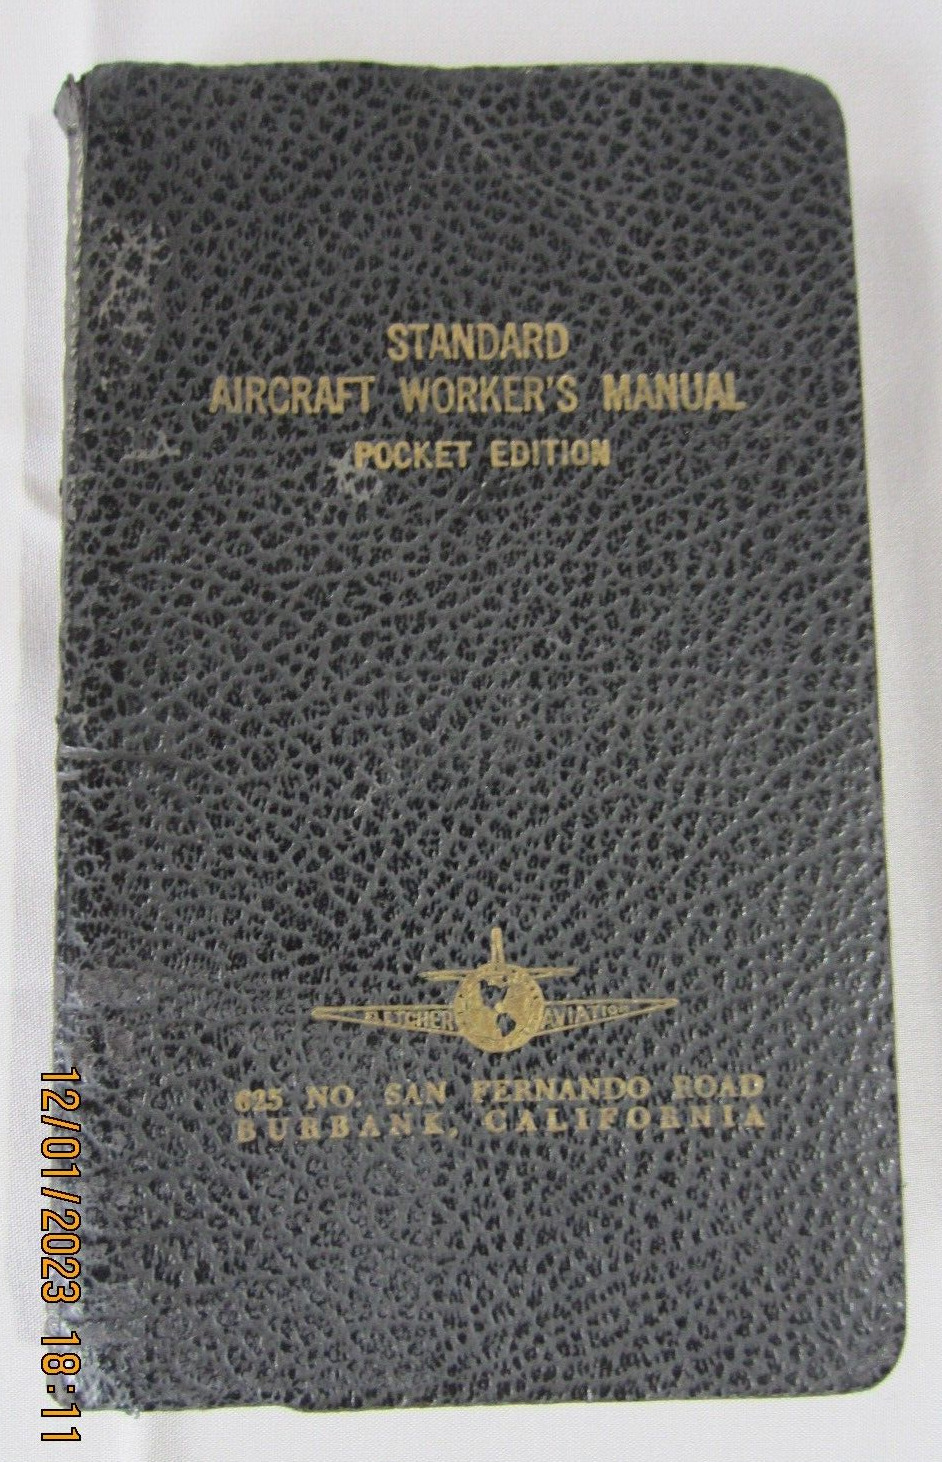 Vintage 1941 WWII Standard Aircraft Workers Manual Pocket Edition 6th Ed.